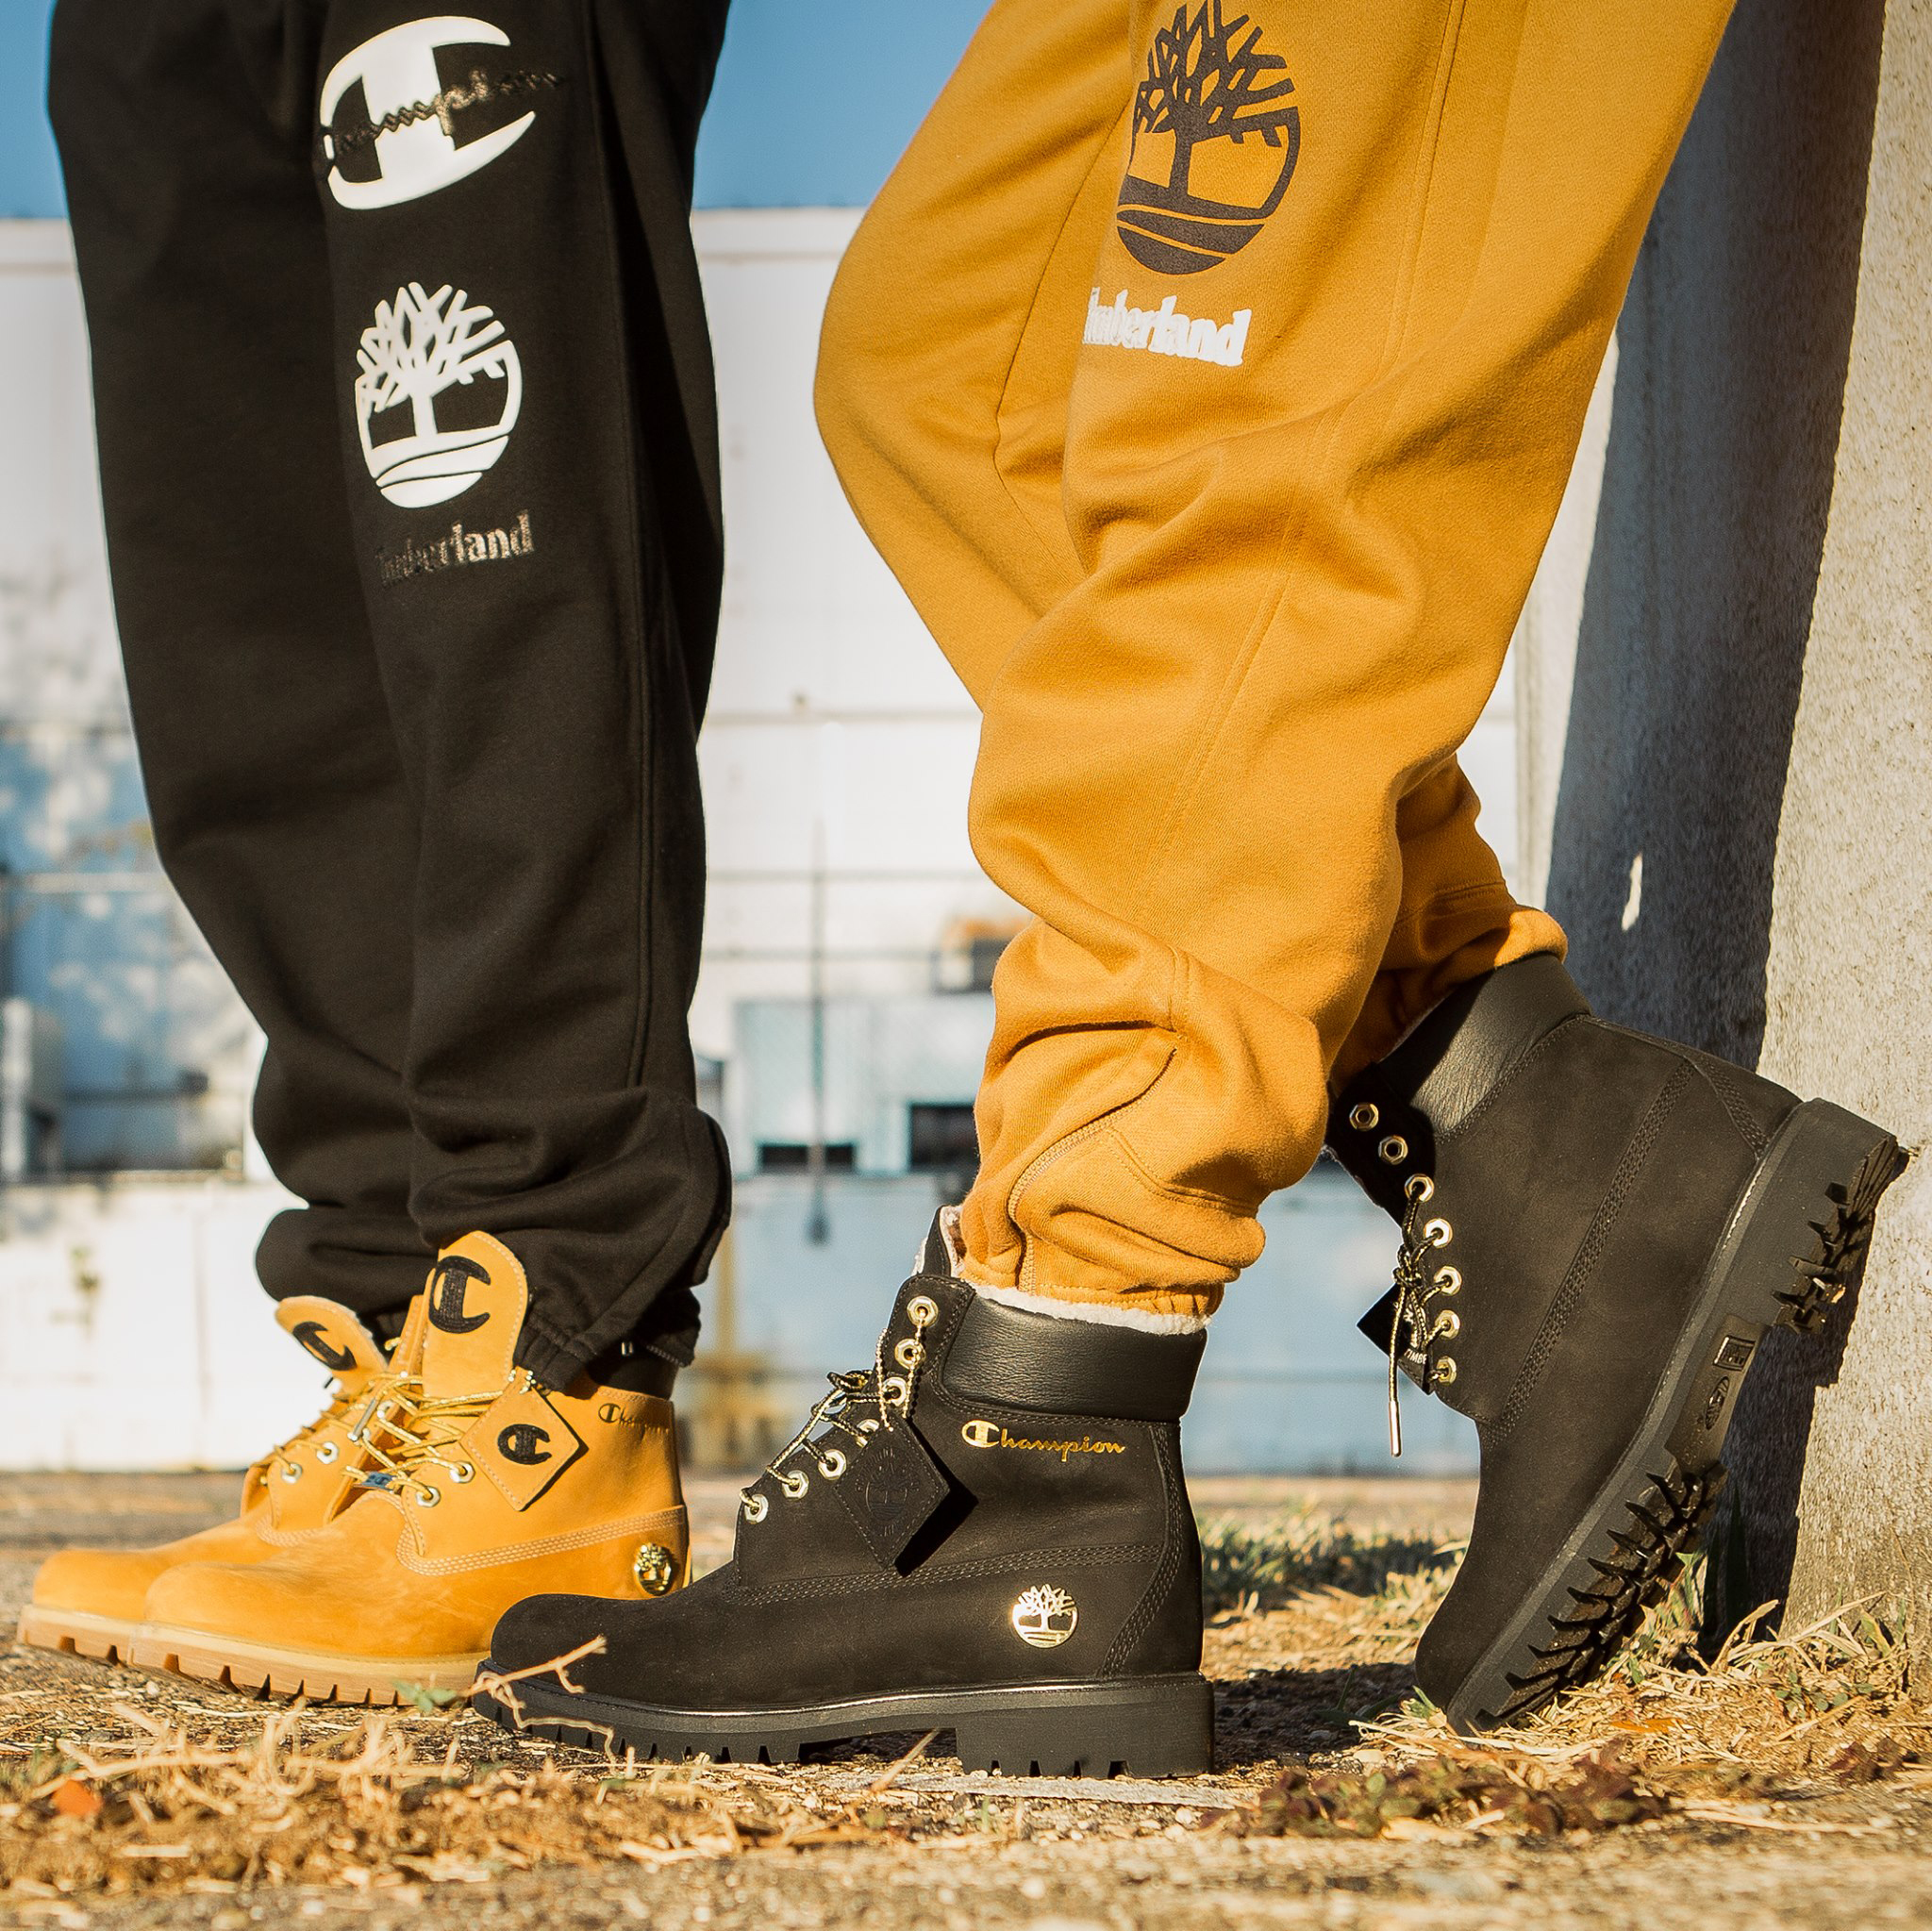 Champion x Timberland Boots and 